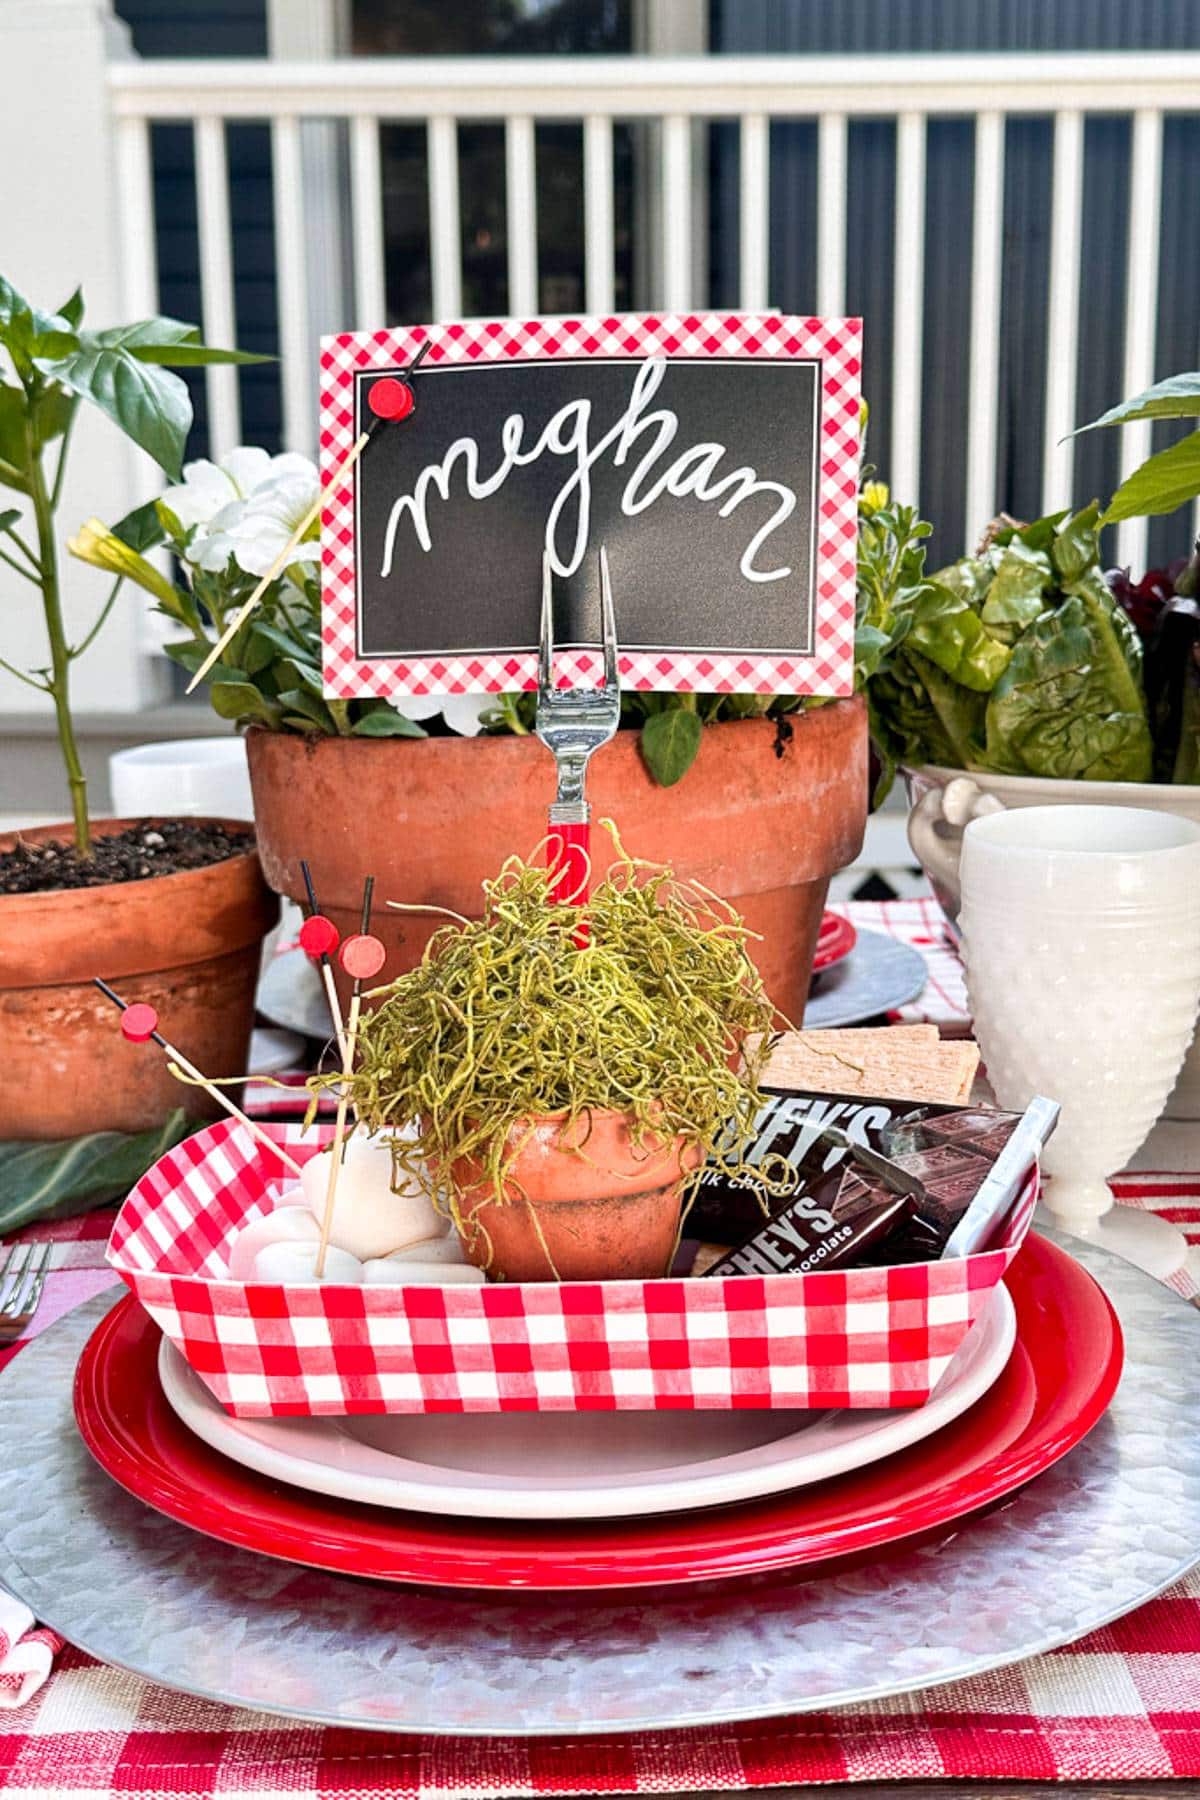 A place card made out of paper was placed in a fork and then placed into a small clay pot with moss. This was then placed into a red and white check paper boat with marshmallows, graham crackers, and chocolate bars.